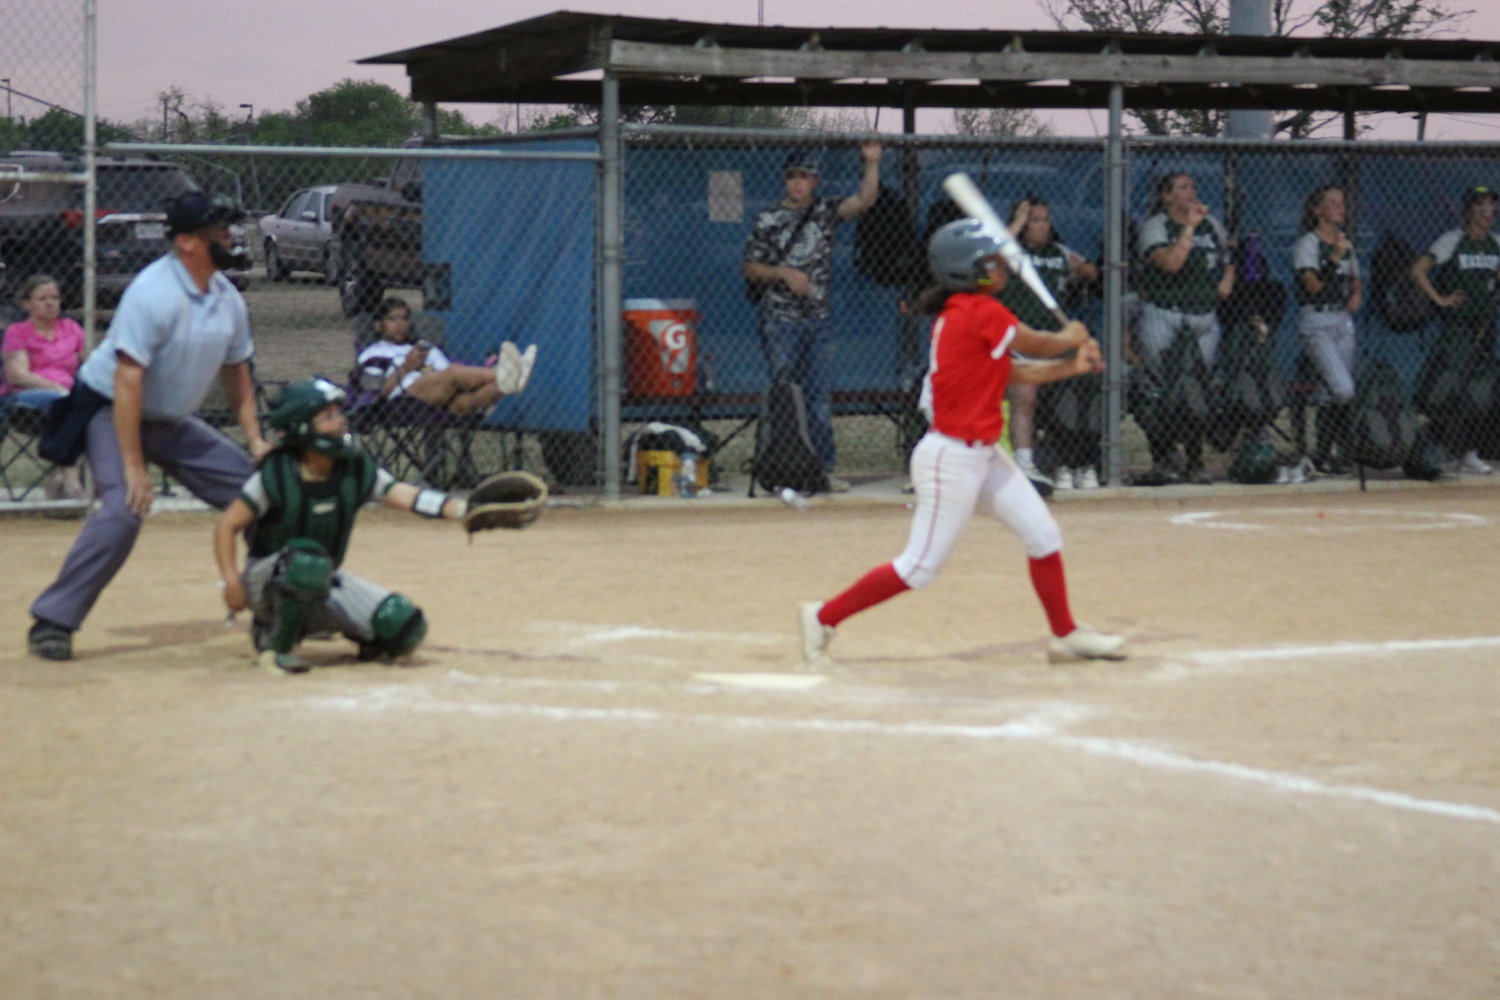 TWO-OUT THUNDER – Mady Velasquez ties up the game with a two-run blast to right field. Velasquez had two home runs, four RBI and was the winning pitcher in Tuesday night’s 13-12 victory over Marion.